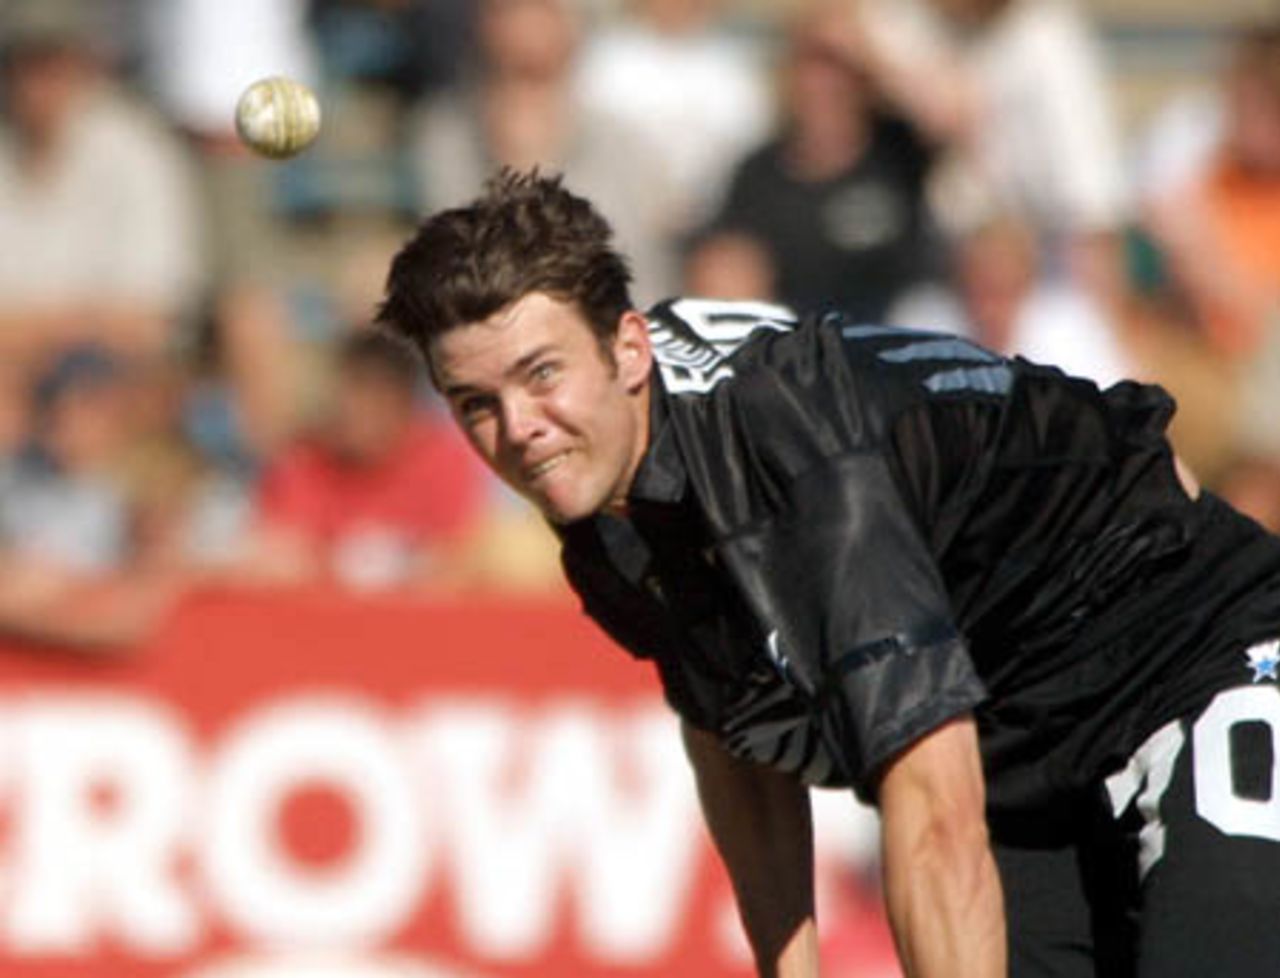 New Zealand left arm fast medium bowler James Franklin delivers a ball during his spell of 1-54 from eight overs. 5th One-Day International: New Zealand v Pakistan, Carisbrook, Dunedin, 28 February 2001.